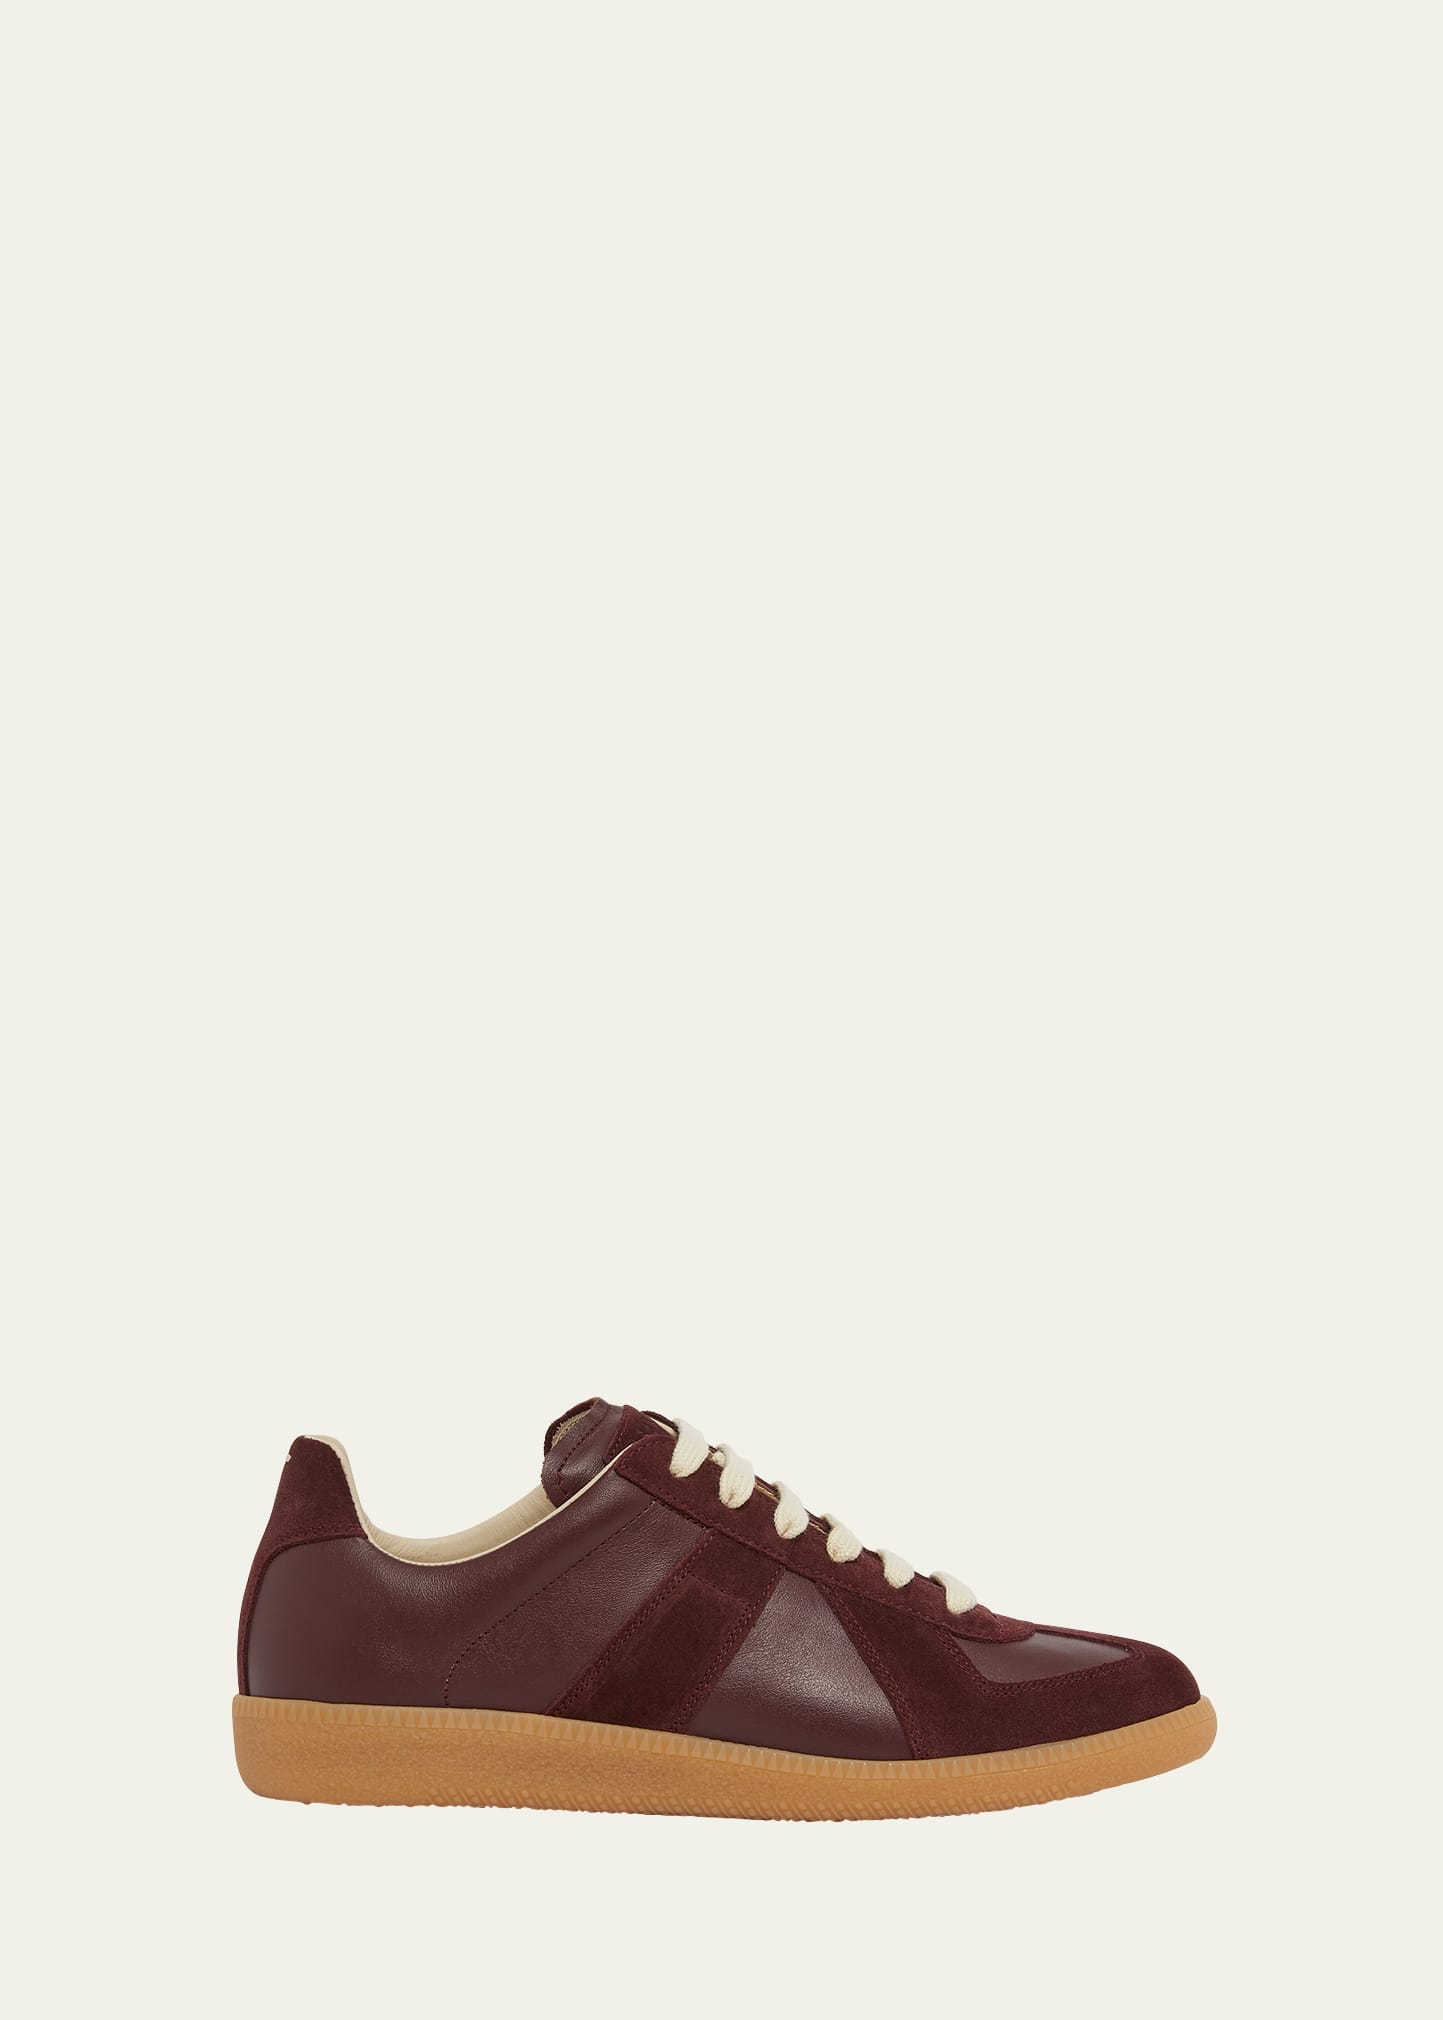 Replica Suede & Leather Sneakers